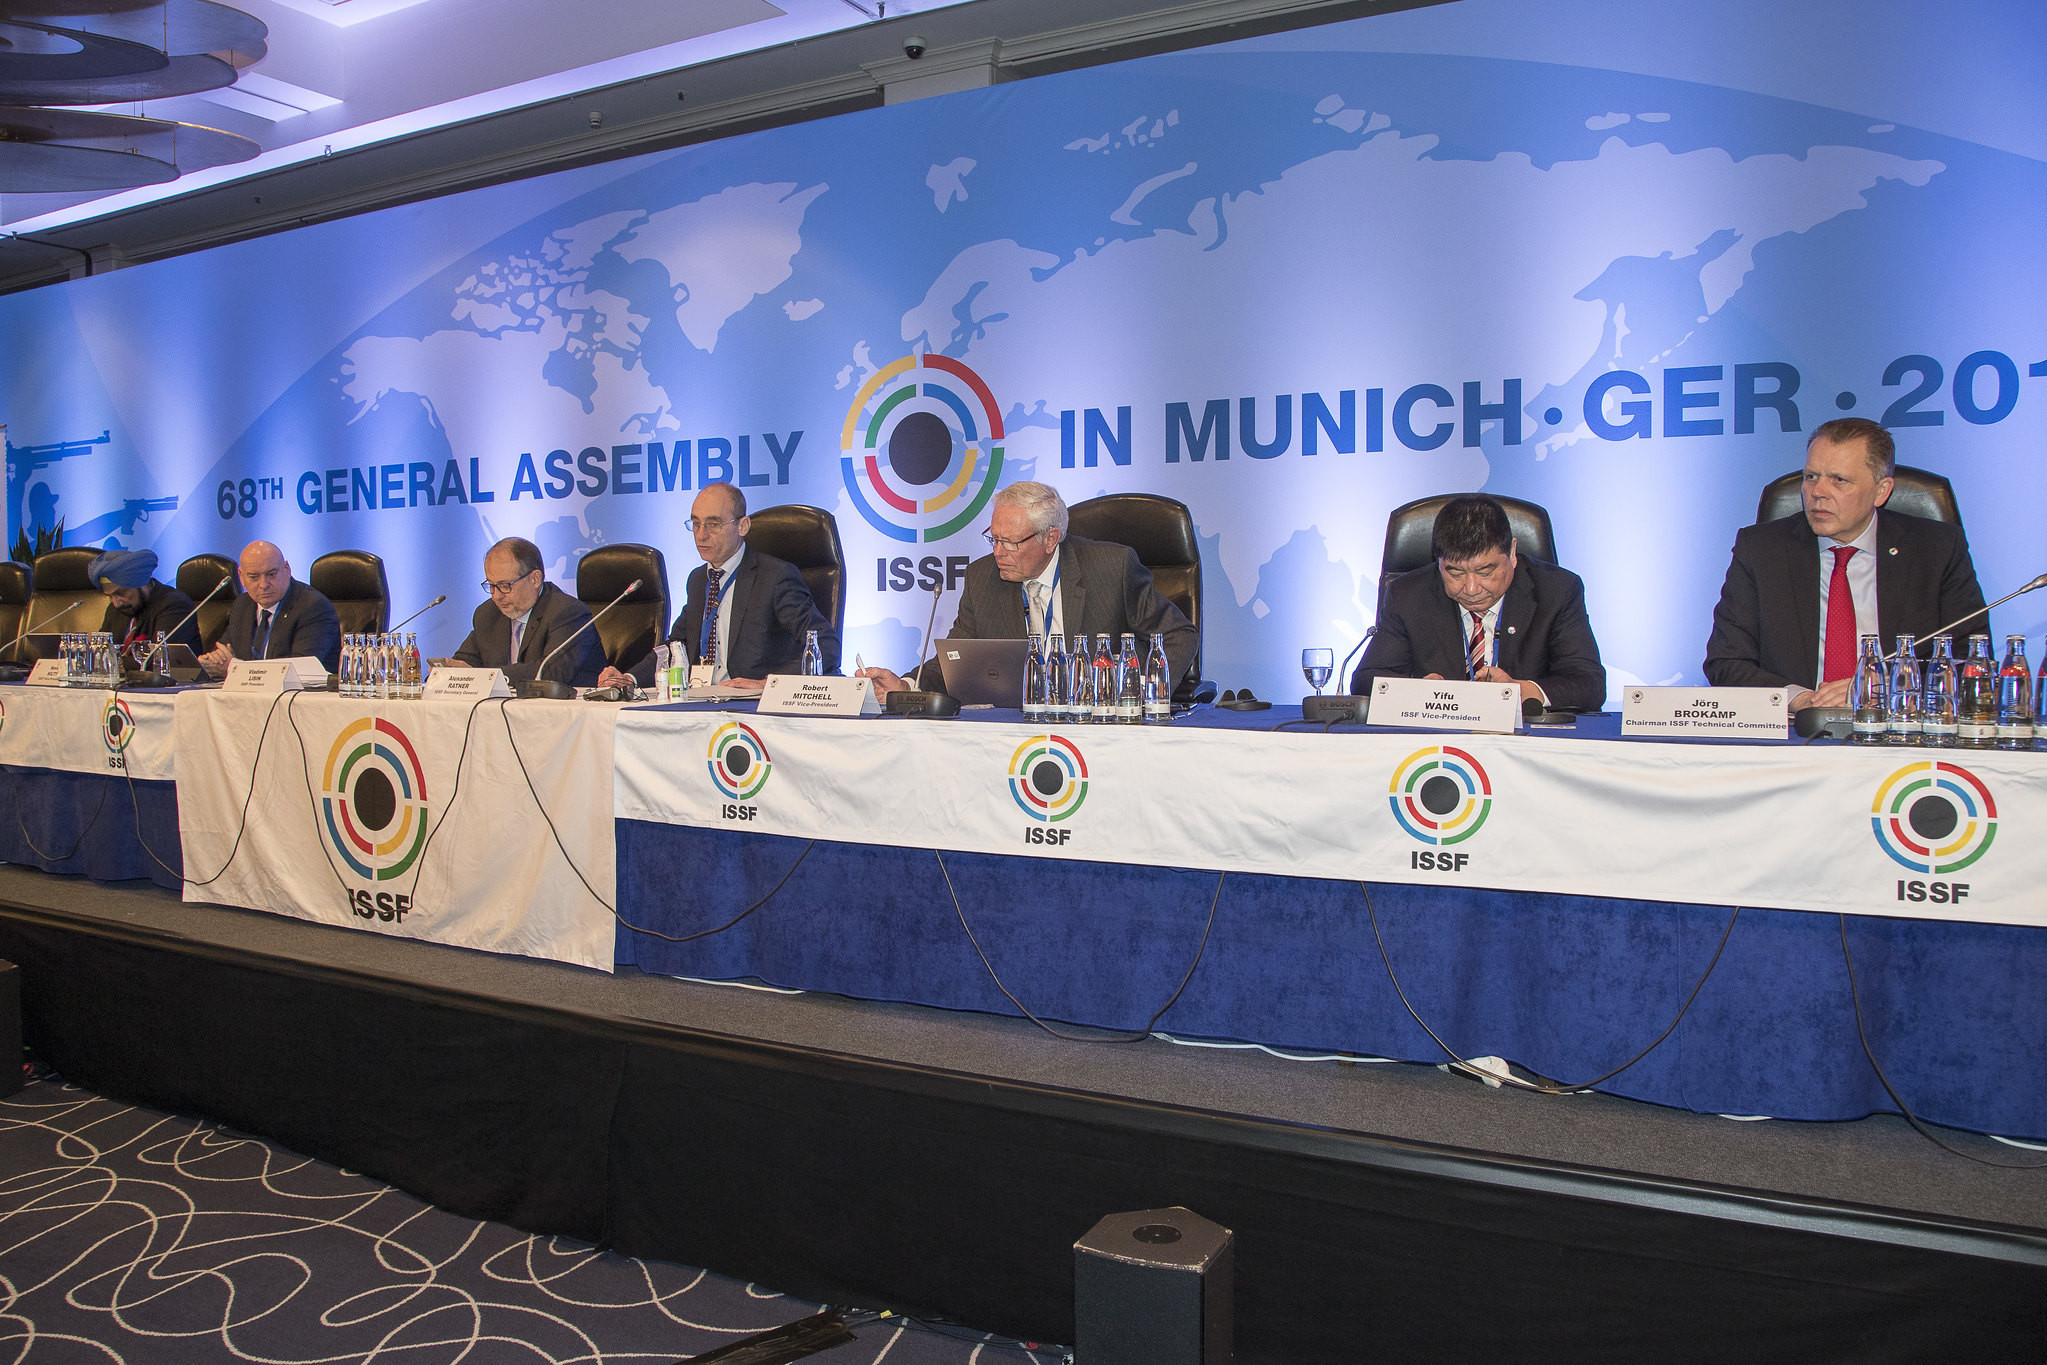 Luciano Rossi is challenging the result of the vote at the ISSF General Assembly in Munich ©ISSF